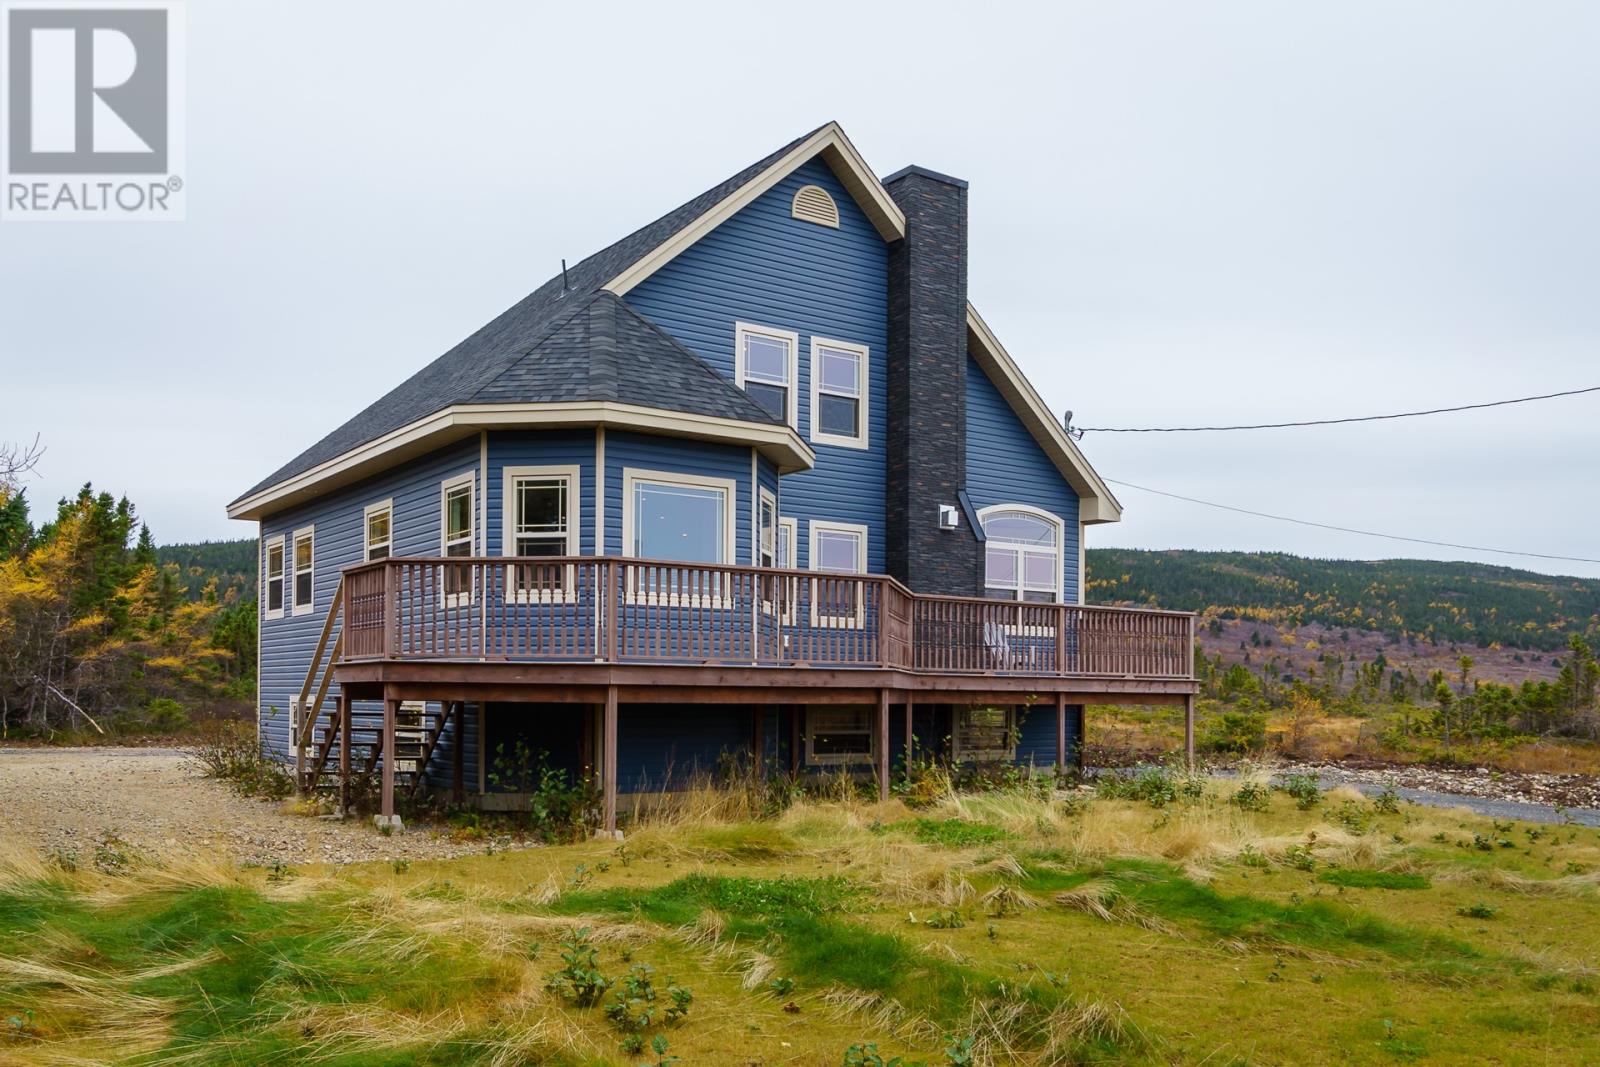 1 Ocean View Drive located in Norman's Cove, Newfoundland and Labrador